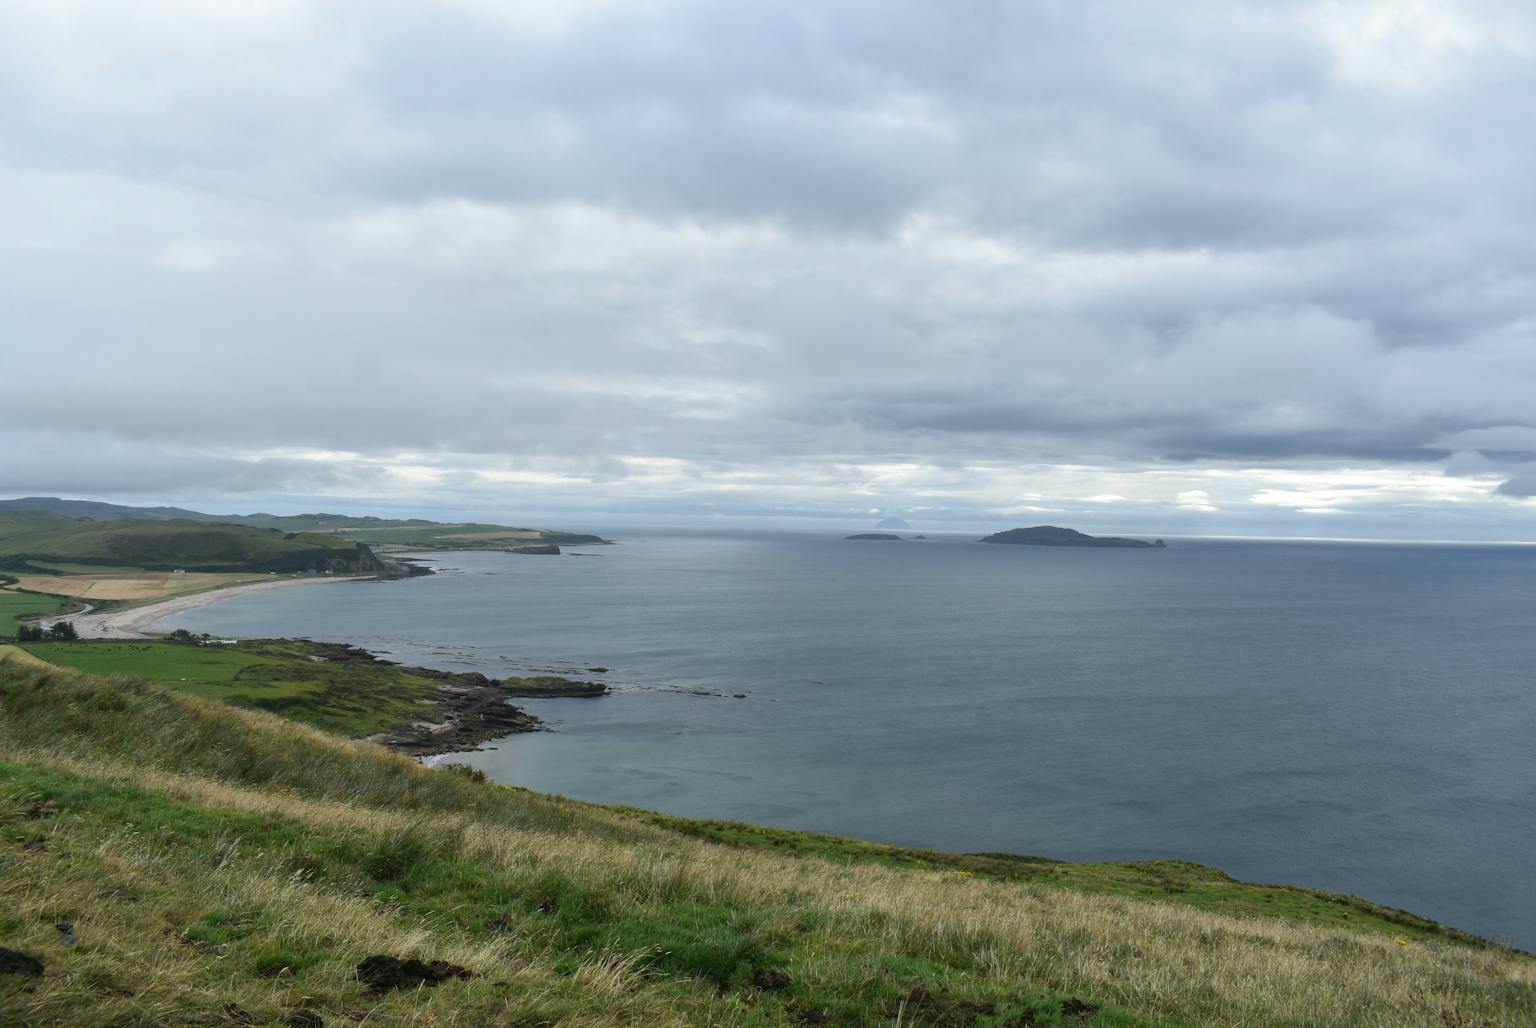 View across the peninsula from the top of hill